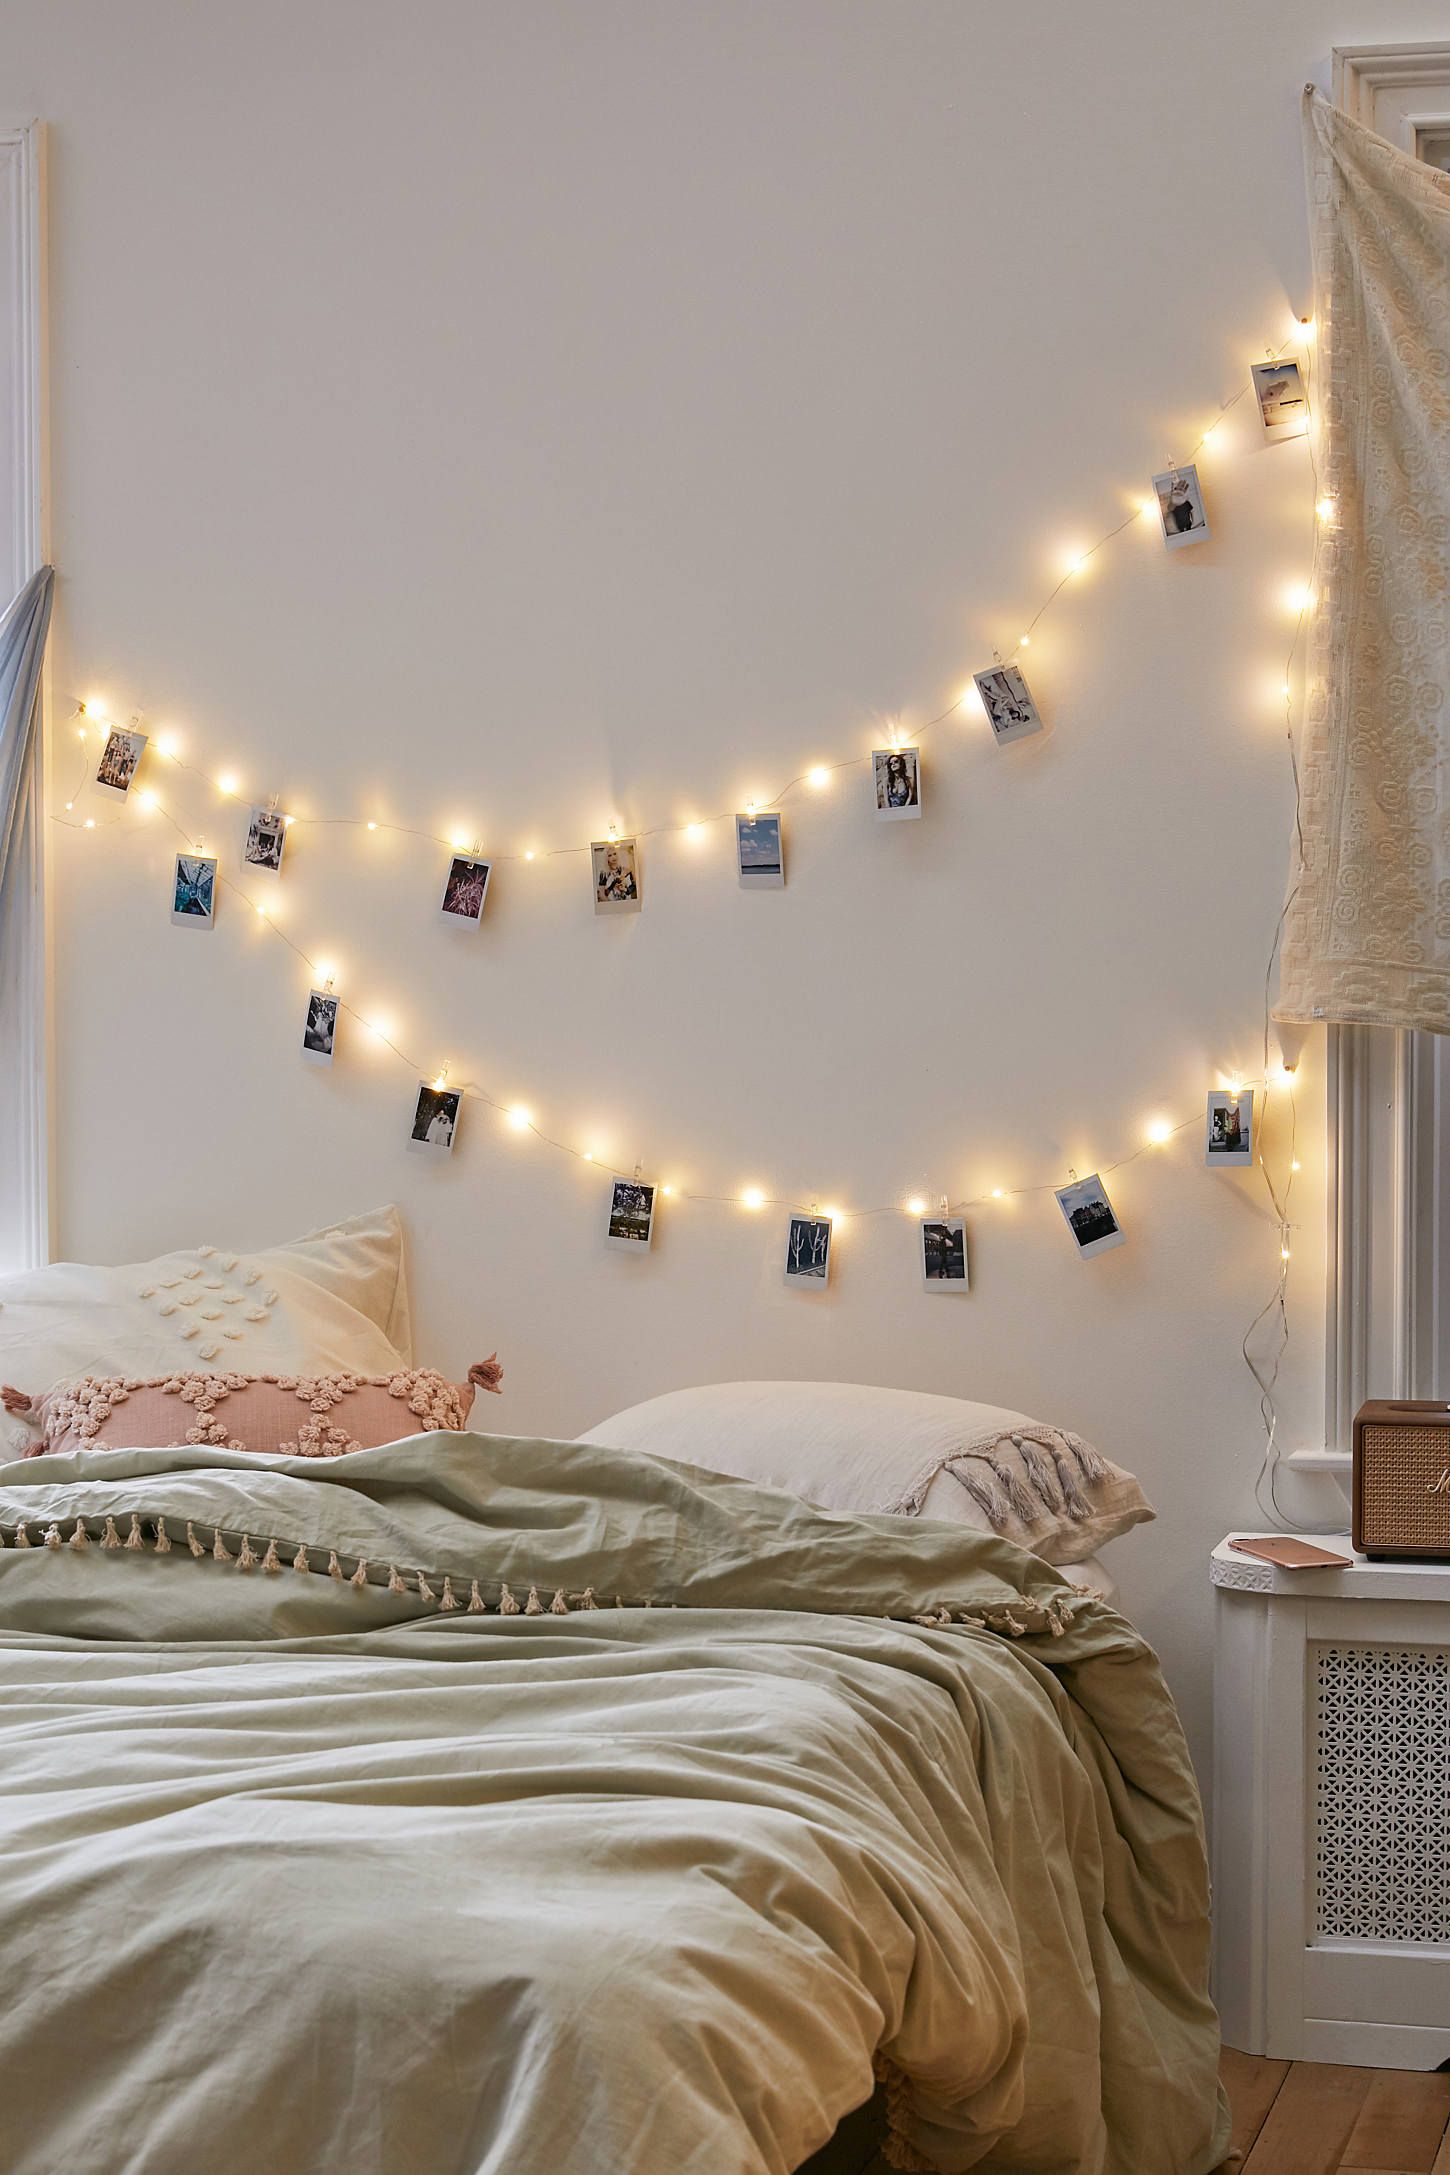 20 Best Dorm Room Decor Ideas For 2021, Best Decorations For Your Room